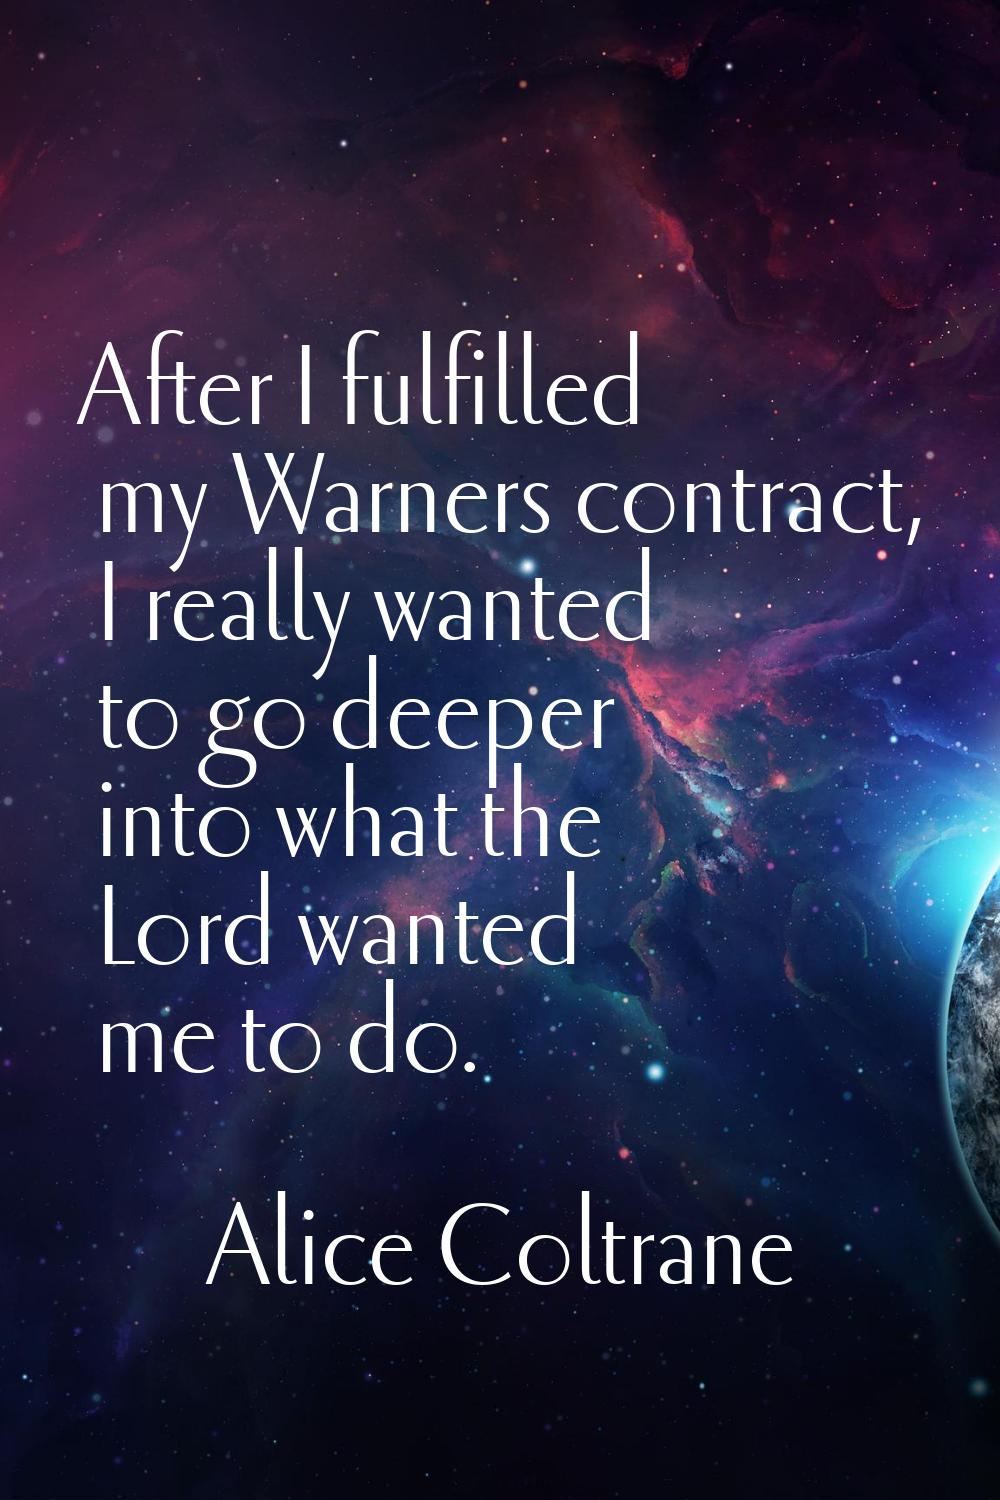 After I fulfilled my Warners contract, I really wanted to go deeper into what the Lord wanted me to